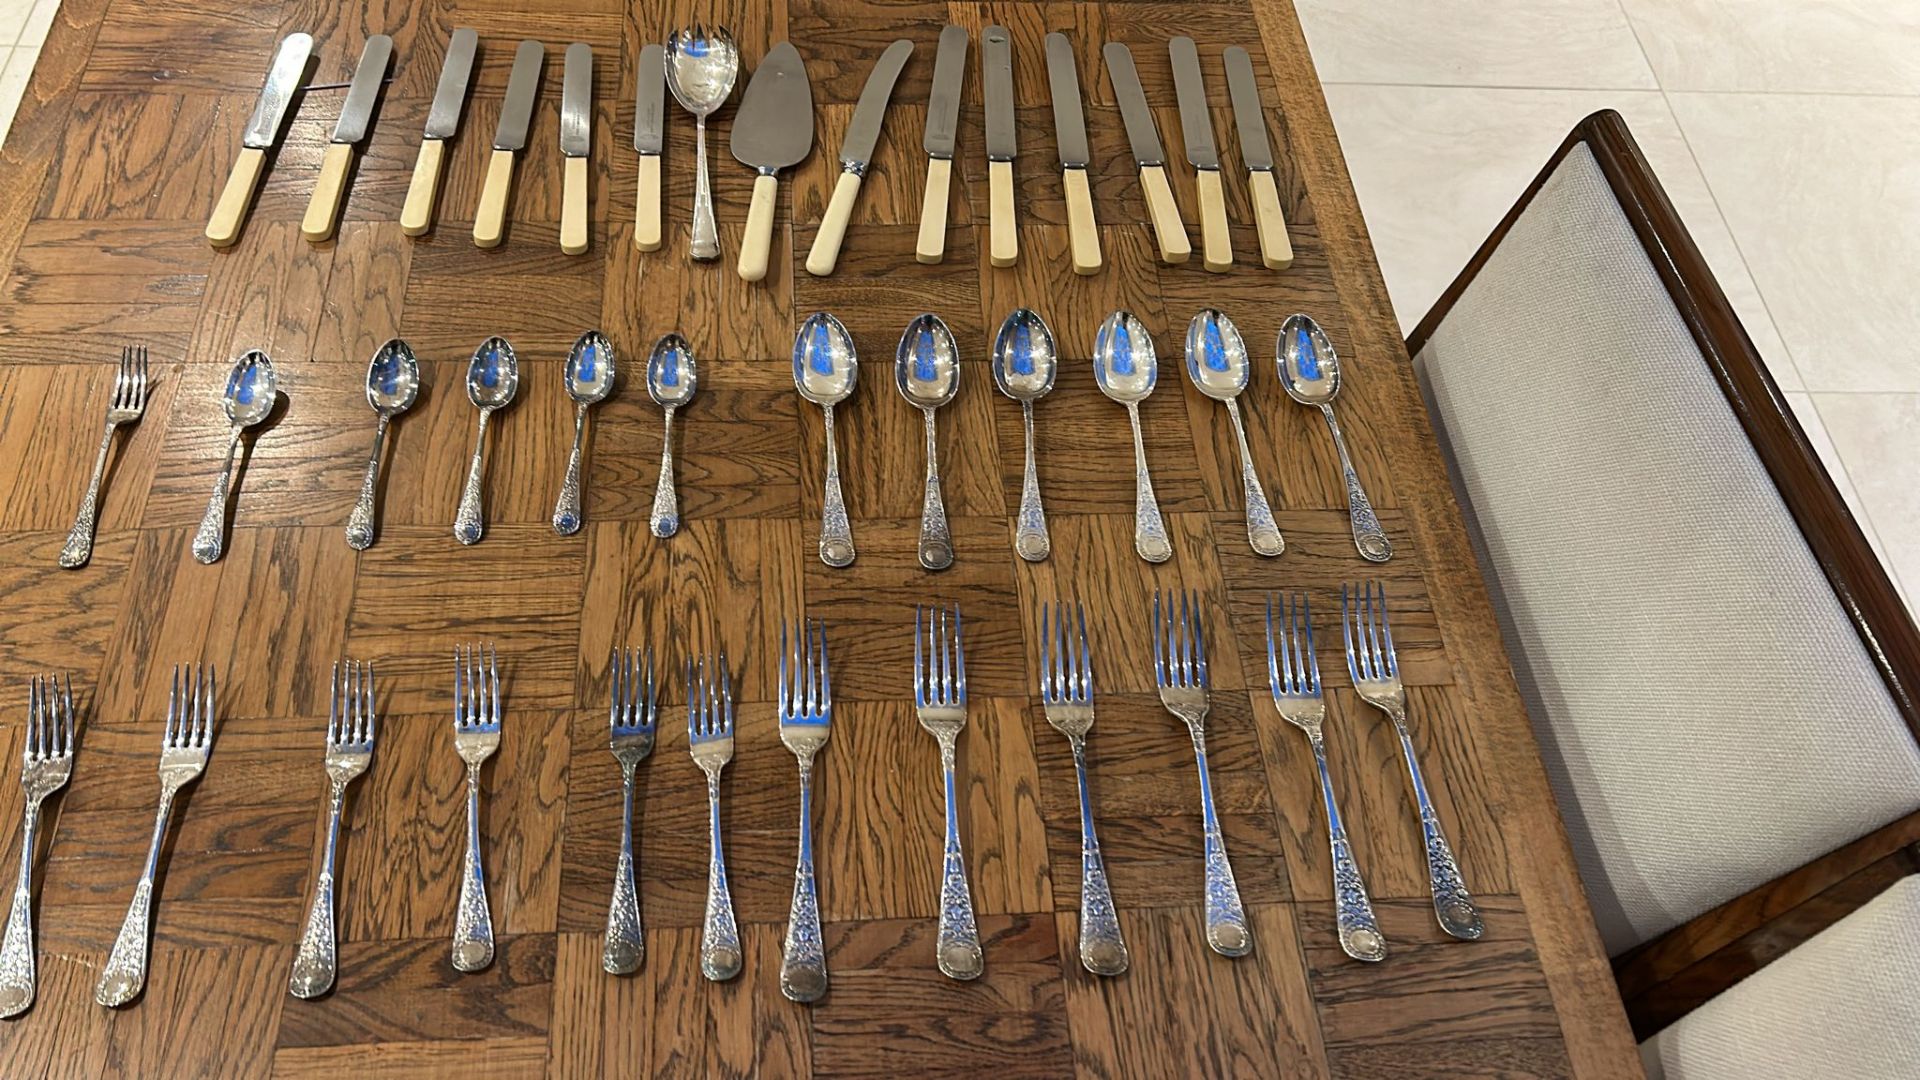 A set of 12 x Vintage Henry Hobson & Sons Express Table Knives - Firth Stainless Flatware, 1930s. - Image 3 of 5